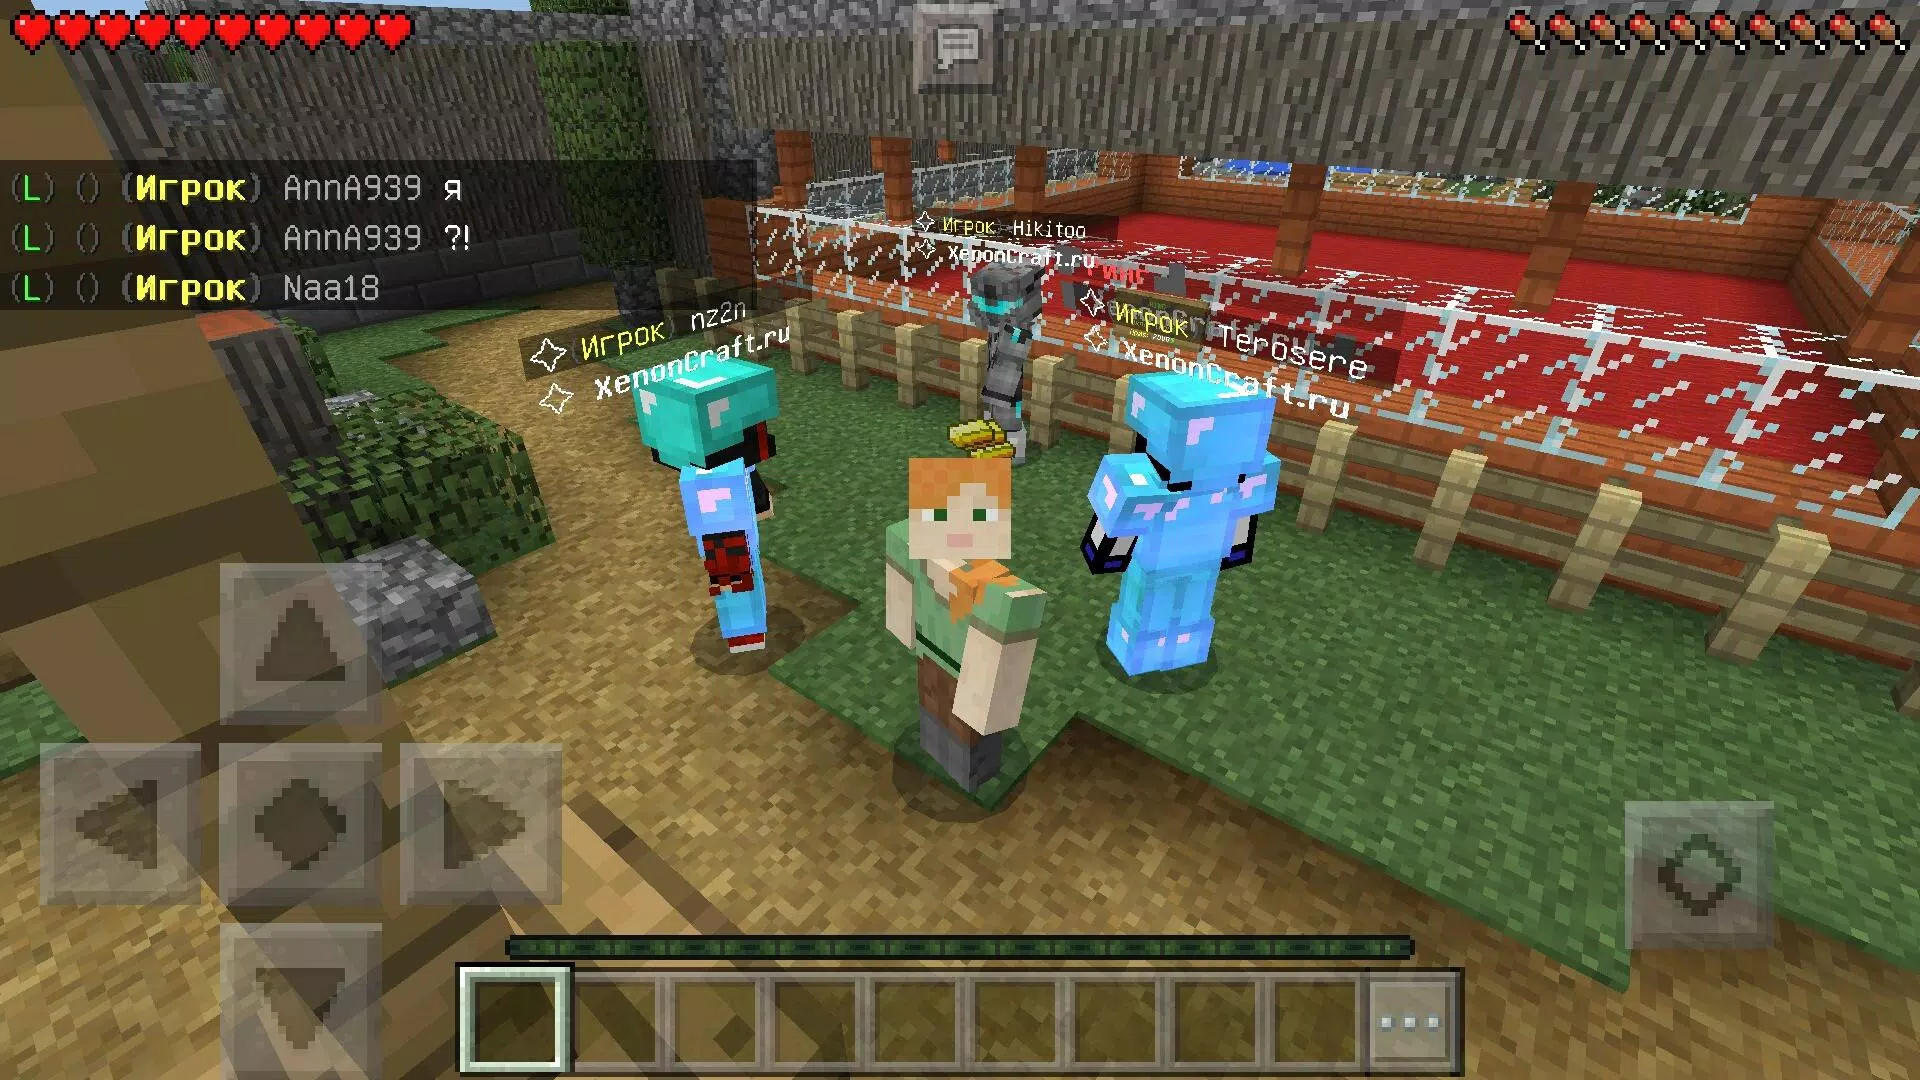 Servers for Minecraft PE Tools - Apps on Google Play